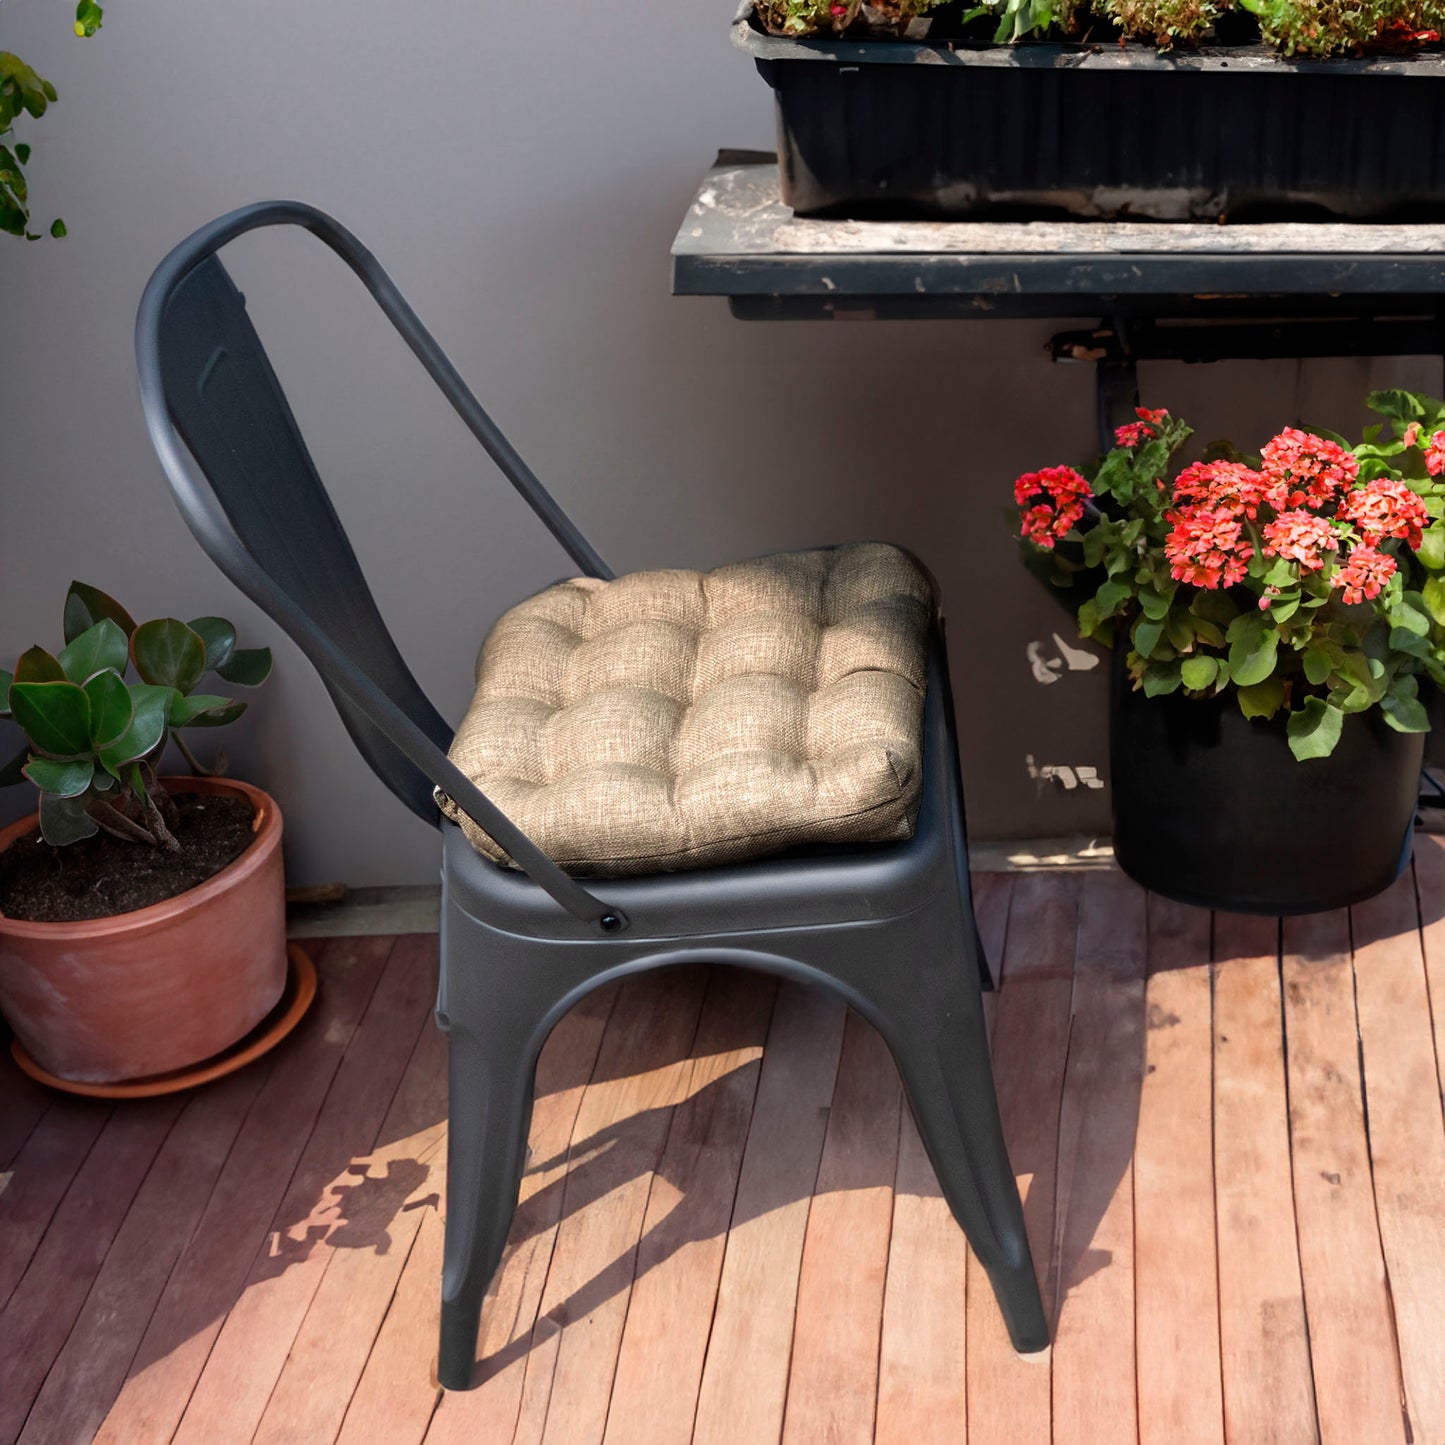 neutral colored outdoor cushion on metal tolix chair outside on the patio